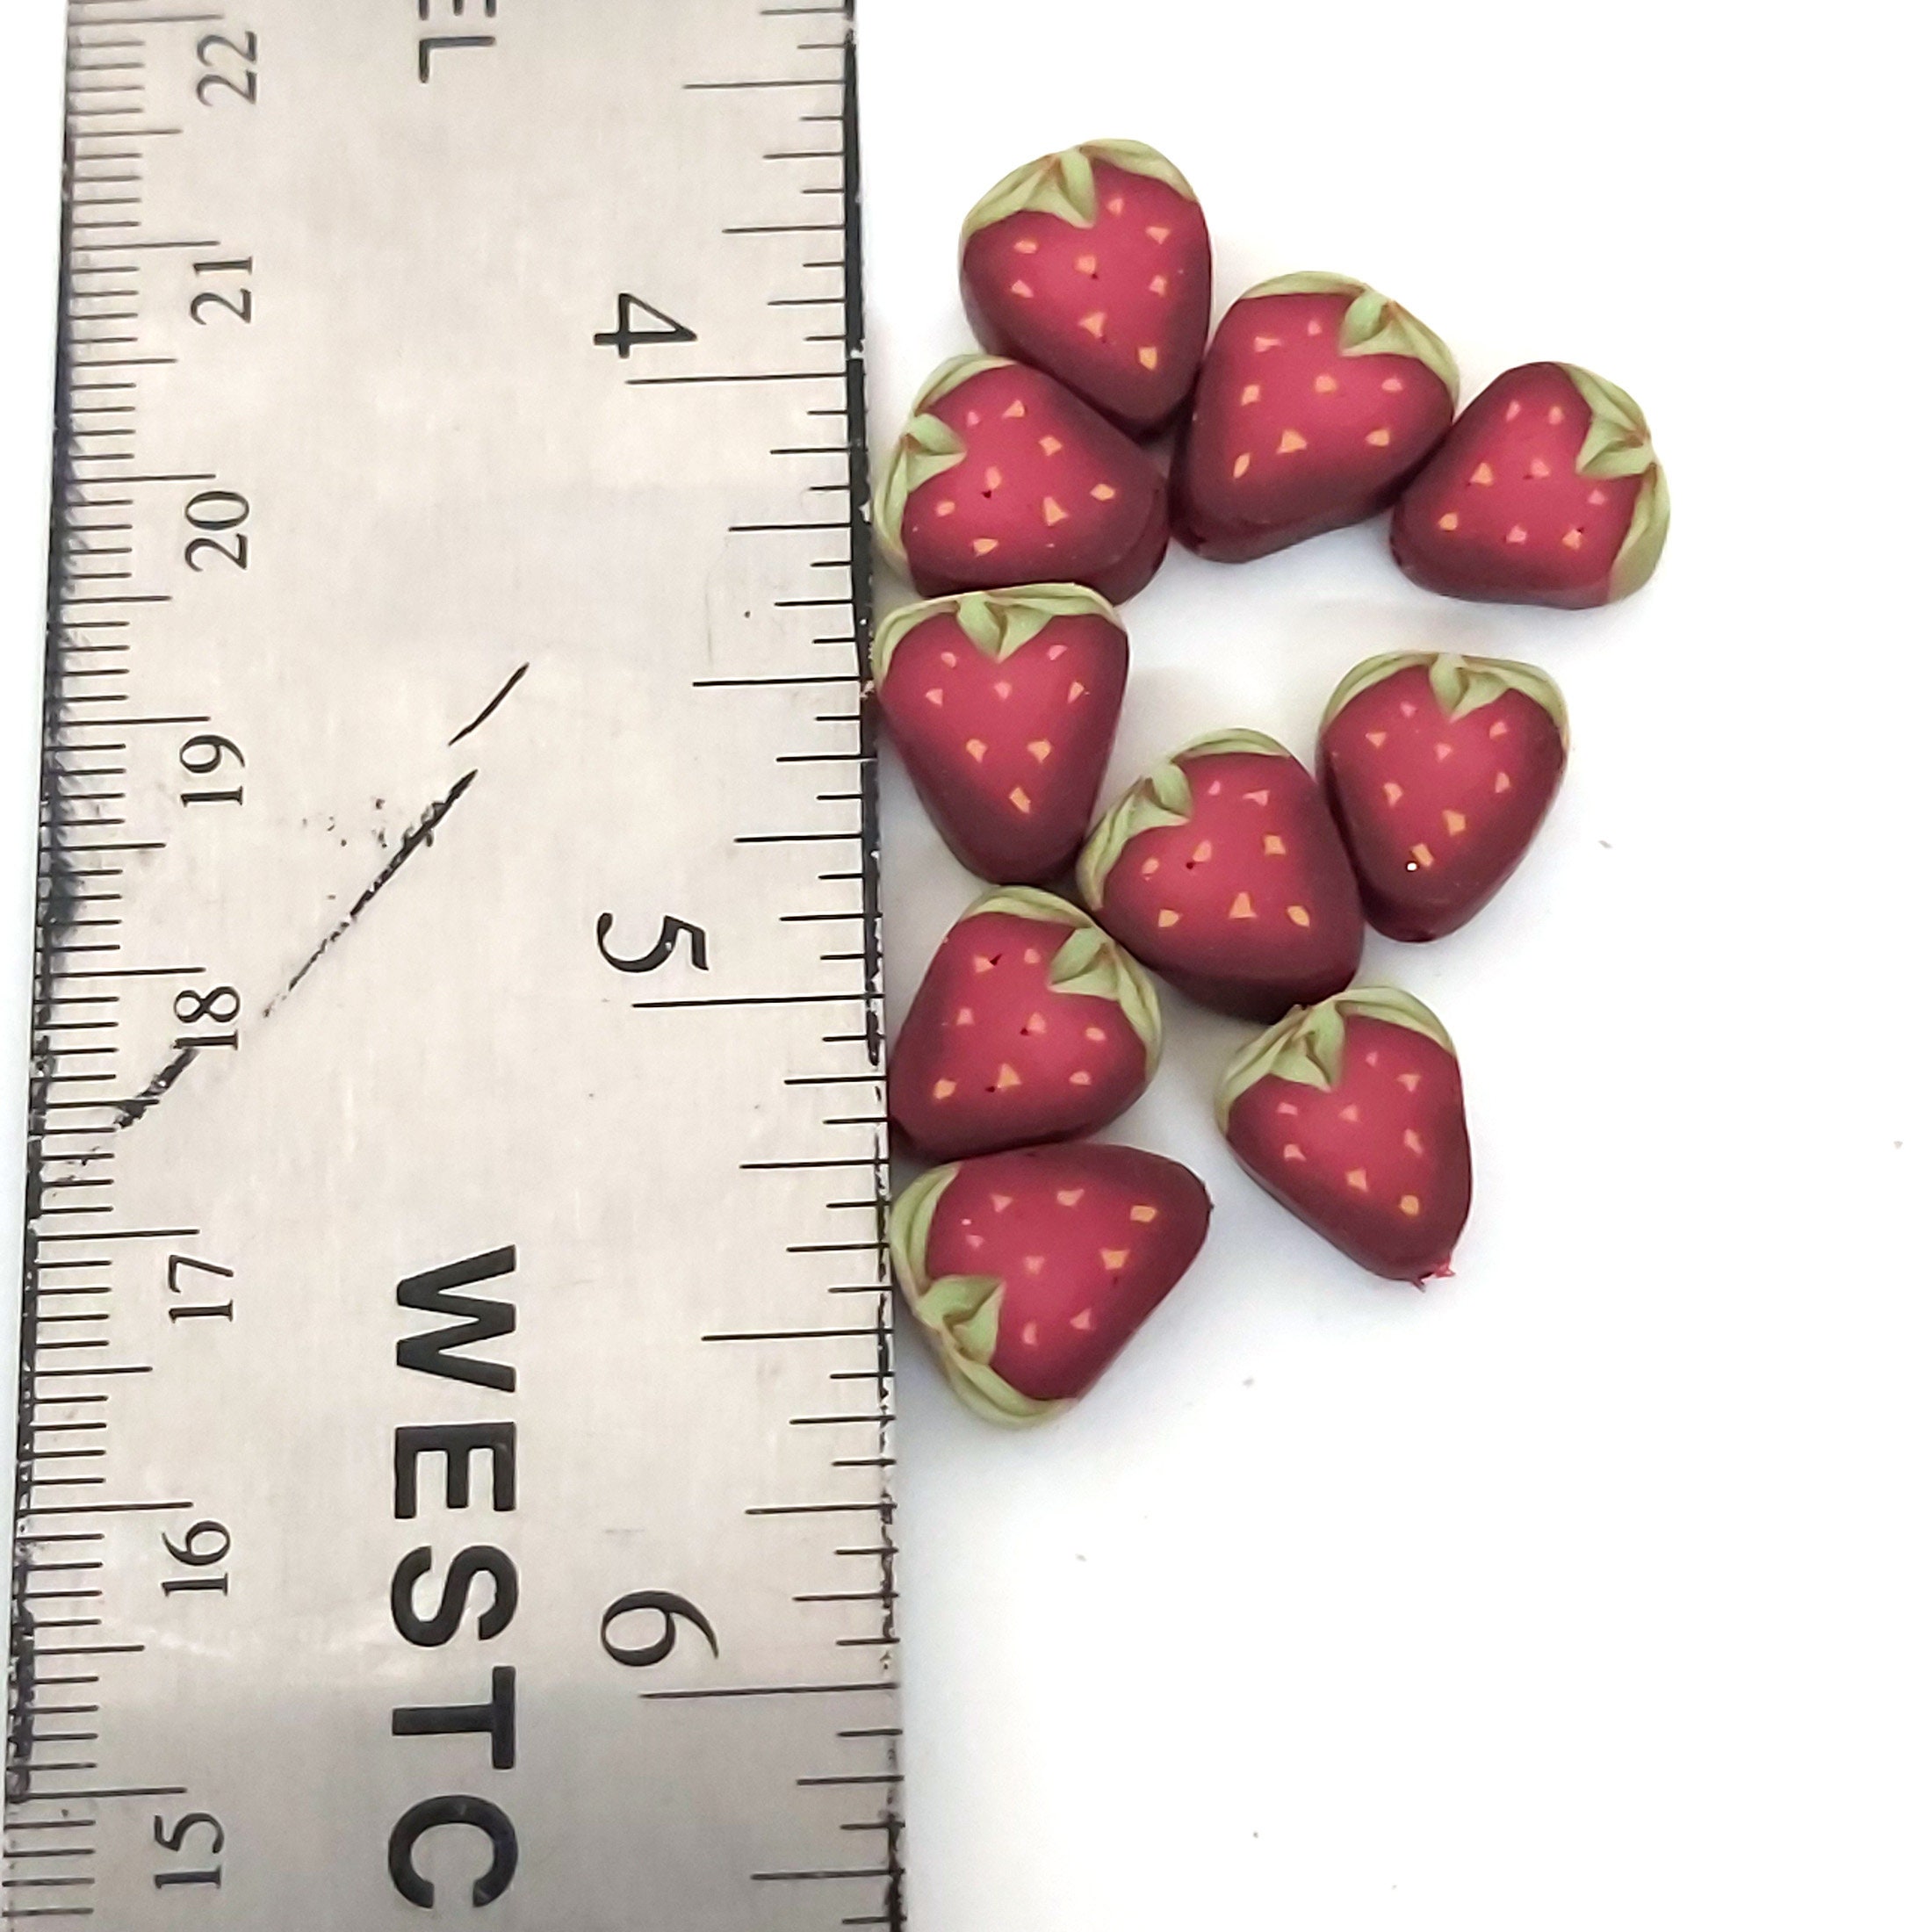 KitBeads 400pcs Polymer Clay Strawberry Beads Kawaii Fruit Slice Beads  Summer Sweet Food Red Berry Beads for Jewelry Making Bracelets Necklace Bulk